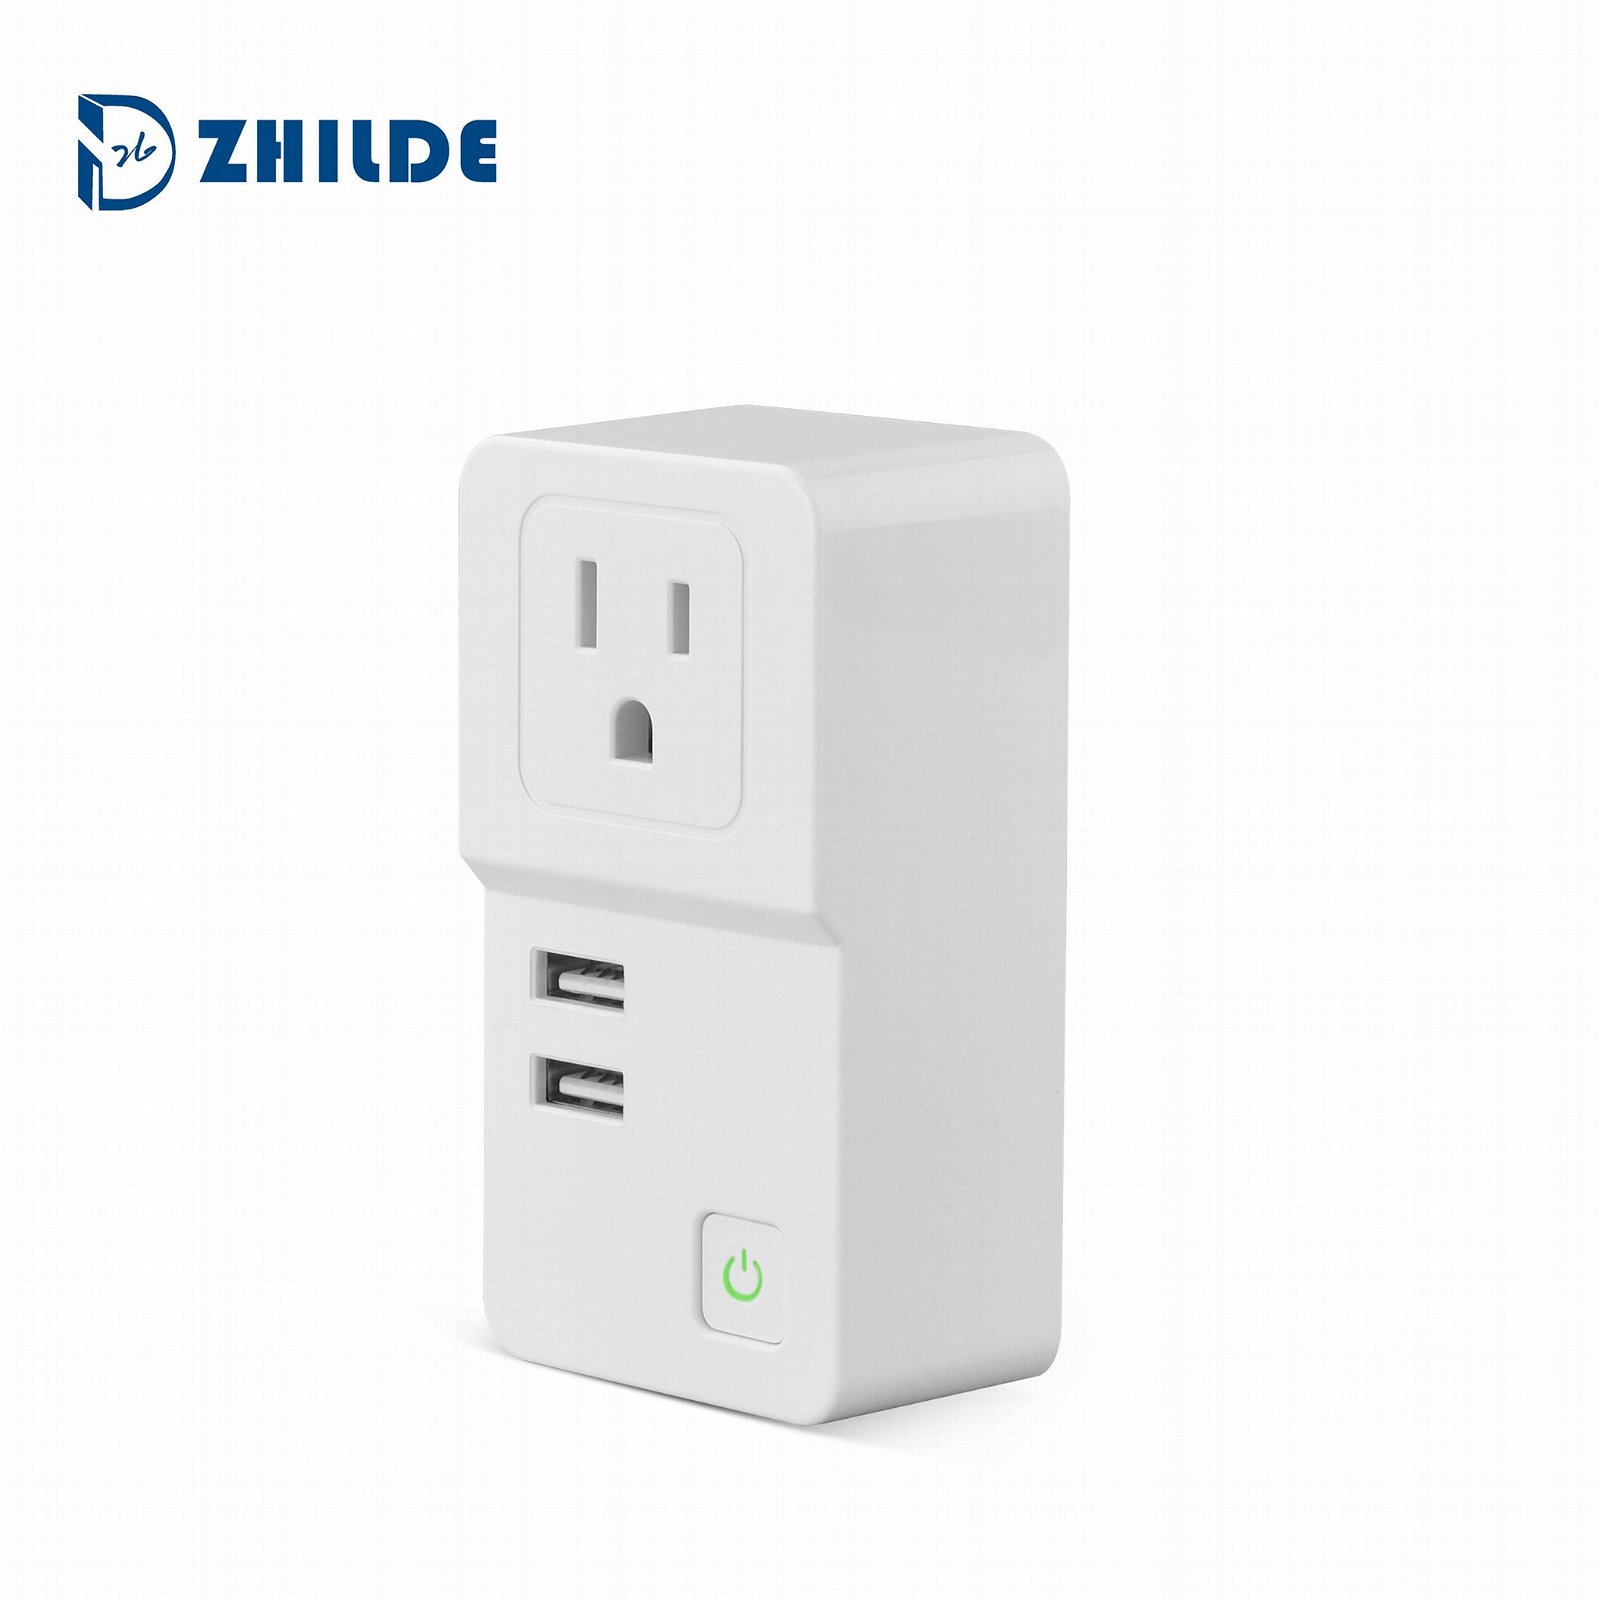 Hot Selling WiFi Power Socket Smart Plug with Dual USB charging Ports  3